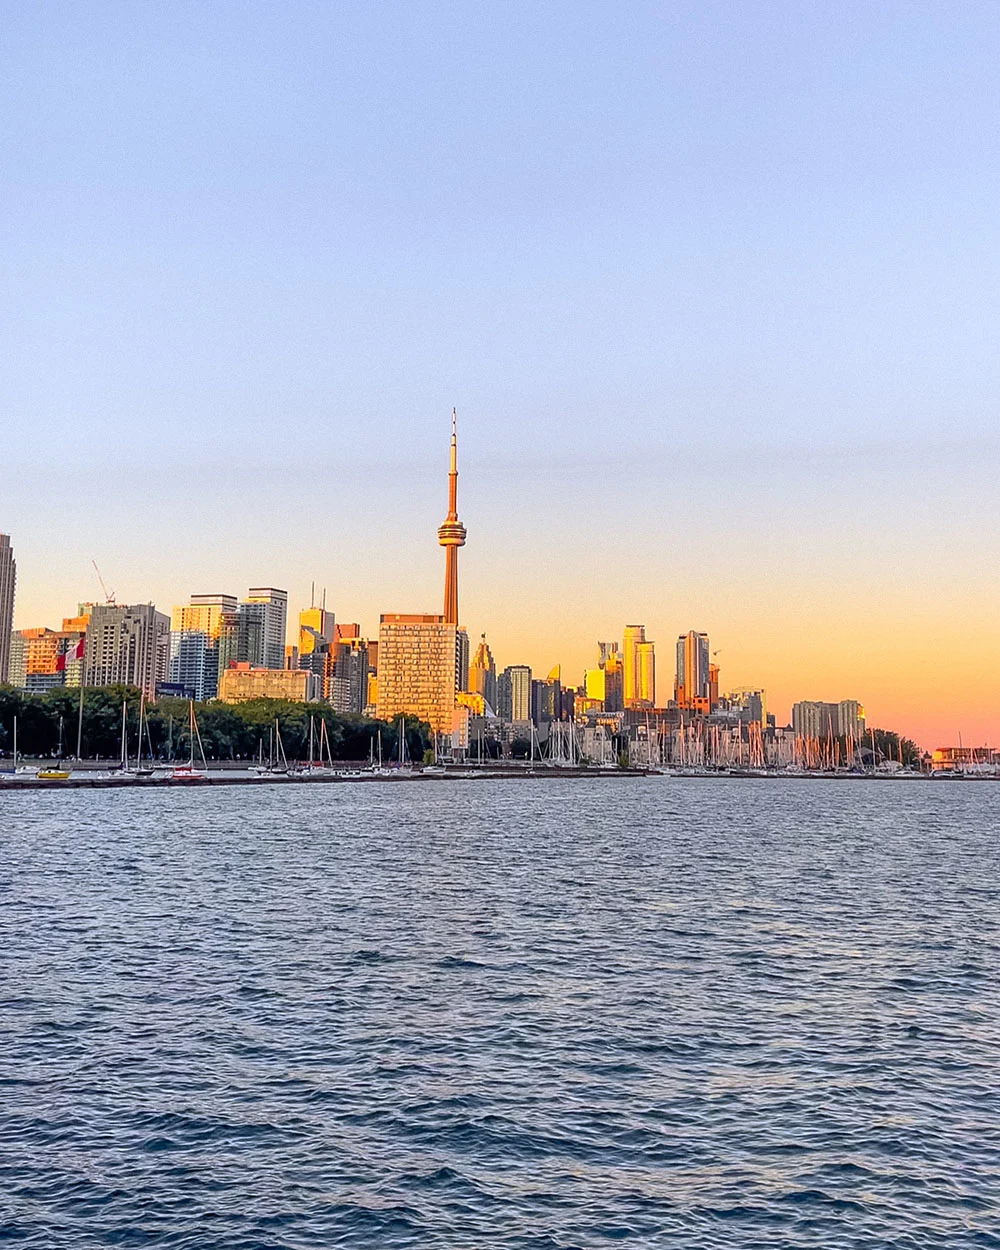 Looking for an incredible place to enjoy your next picnic in Toronto? This guide features some of the best picnic spots in Toronto from a local's perspective. Whether you're looking to picnic in a park, to spend your day sunning and snacking on a beach, prefer a garden hang, or want to check out a more unique destination, this guide has all of the best picnic spots for you to choose from. Pictured here: Trillium Park